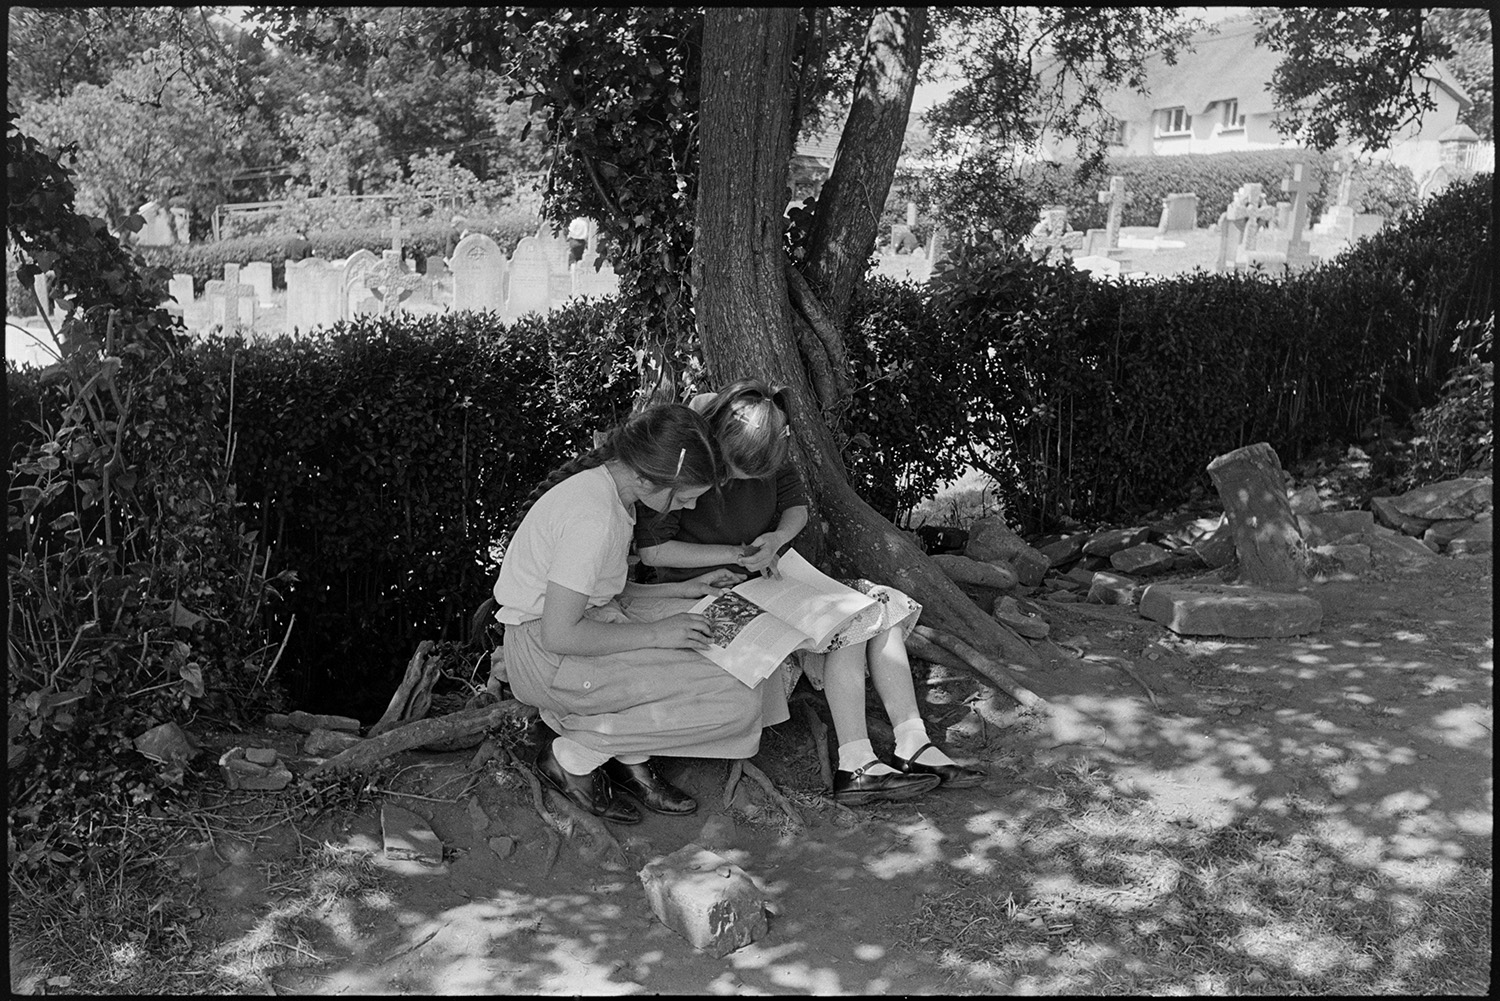 A day in a primary school, cook making cakes, games in the playground, teaching,
[Two girls at Chulmleigh Primary School sitting under a tree and hedgerow next to the churchyard reading a book. A house with a thatched roof can be seen in the background.]